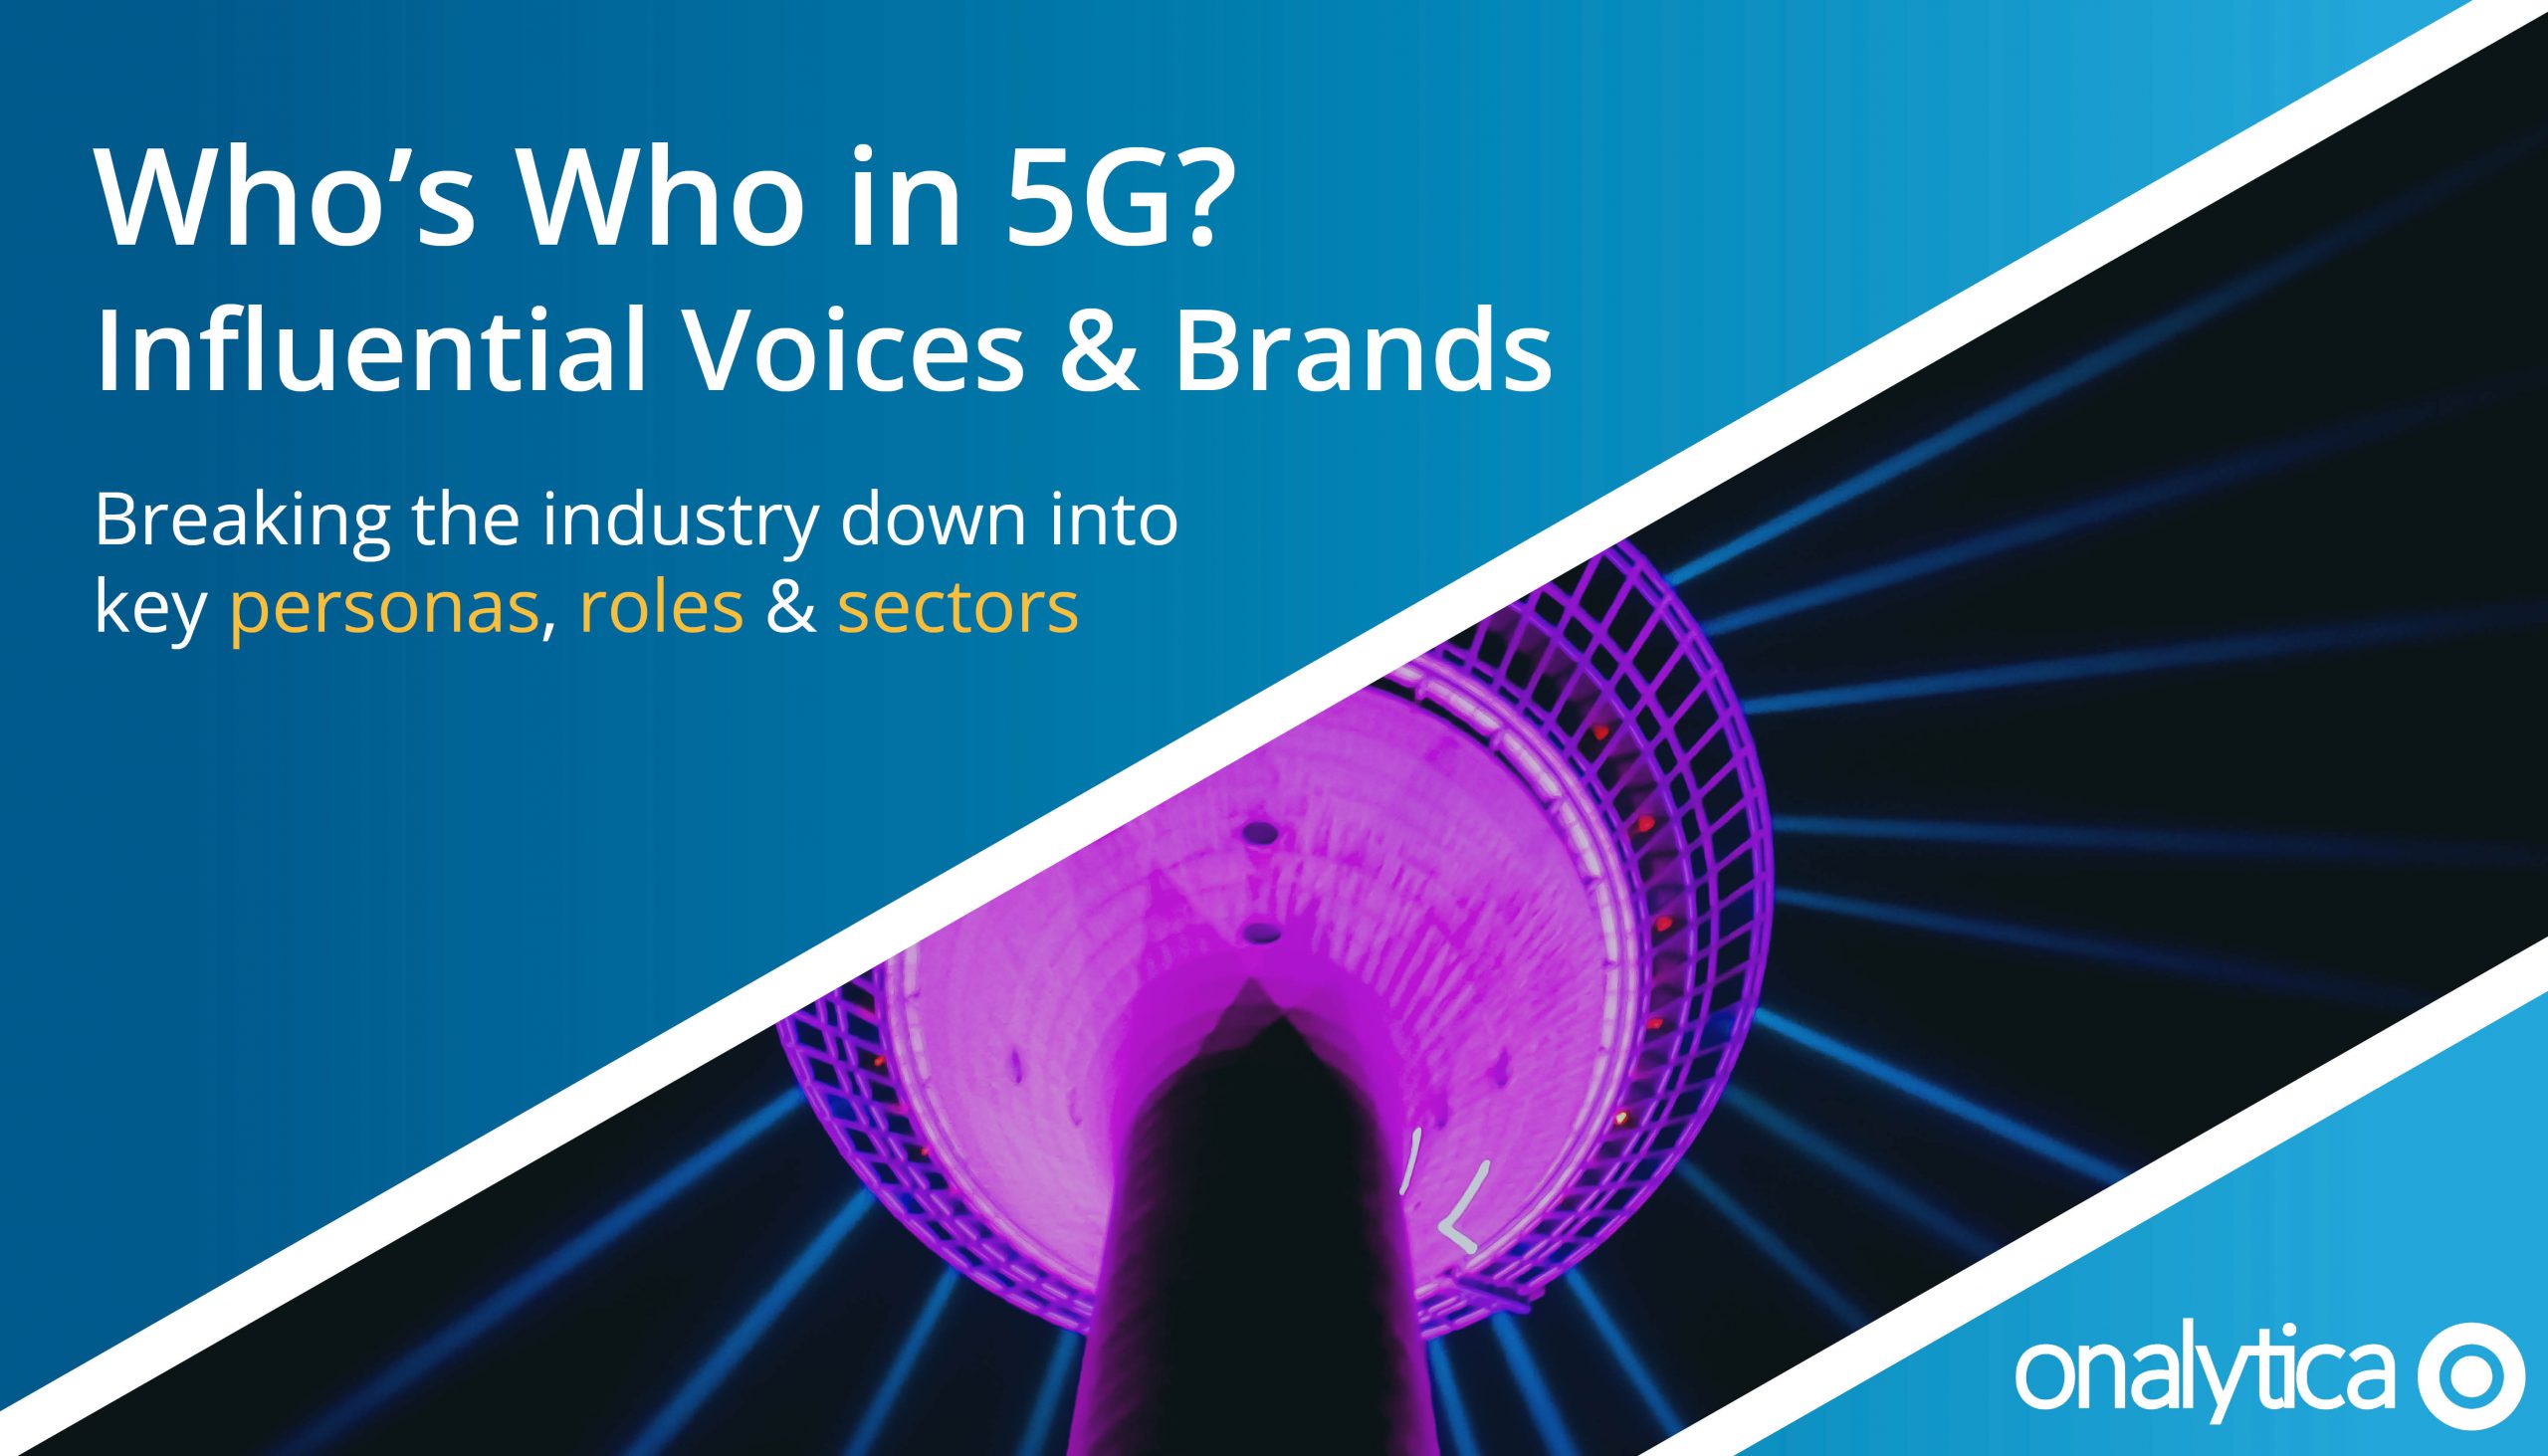 Who’s Who in 5G?